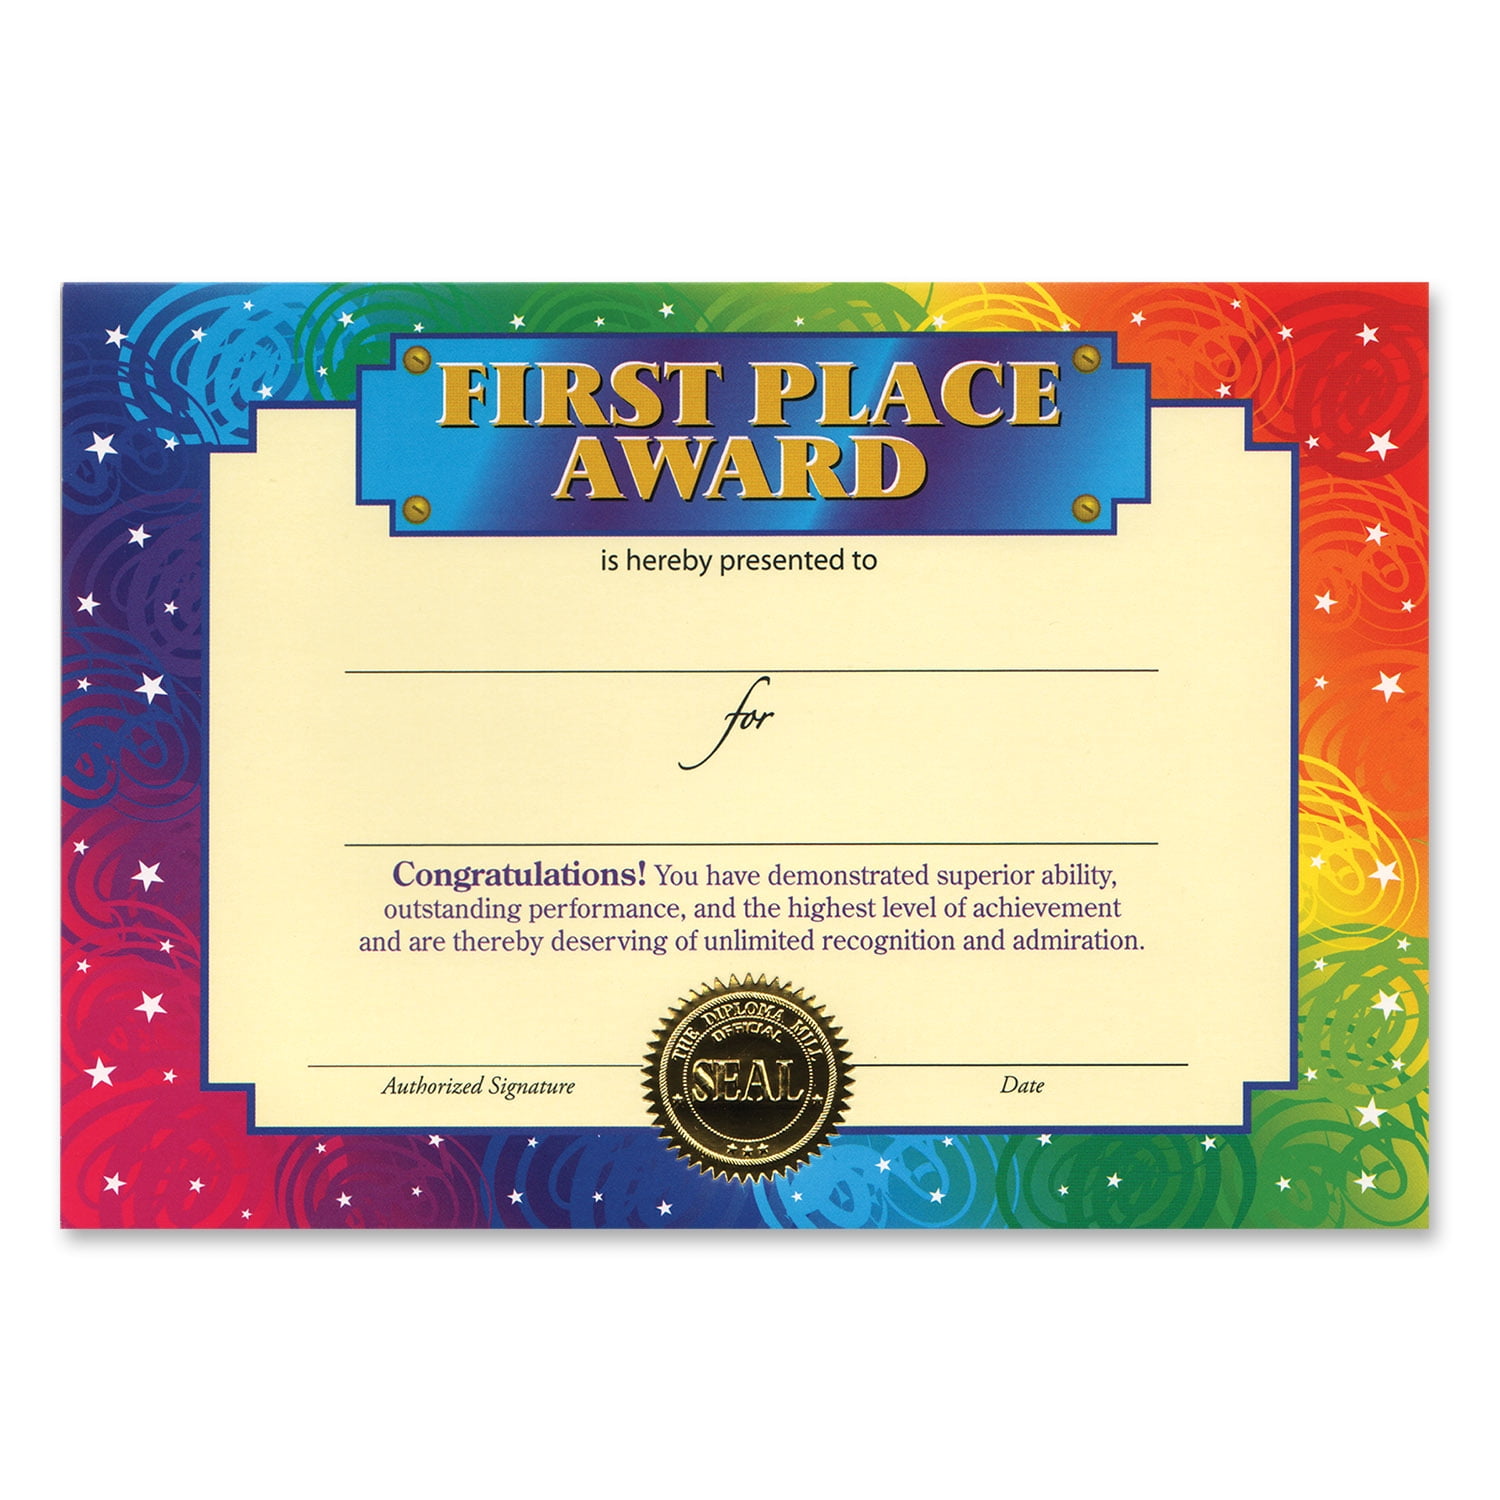 First Place Award Certificate (Pack of 6) Walmart Canada